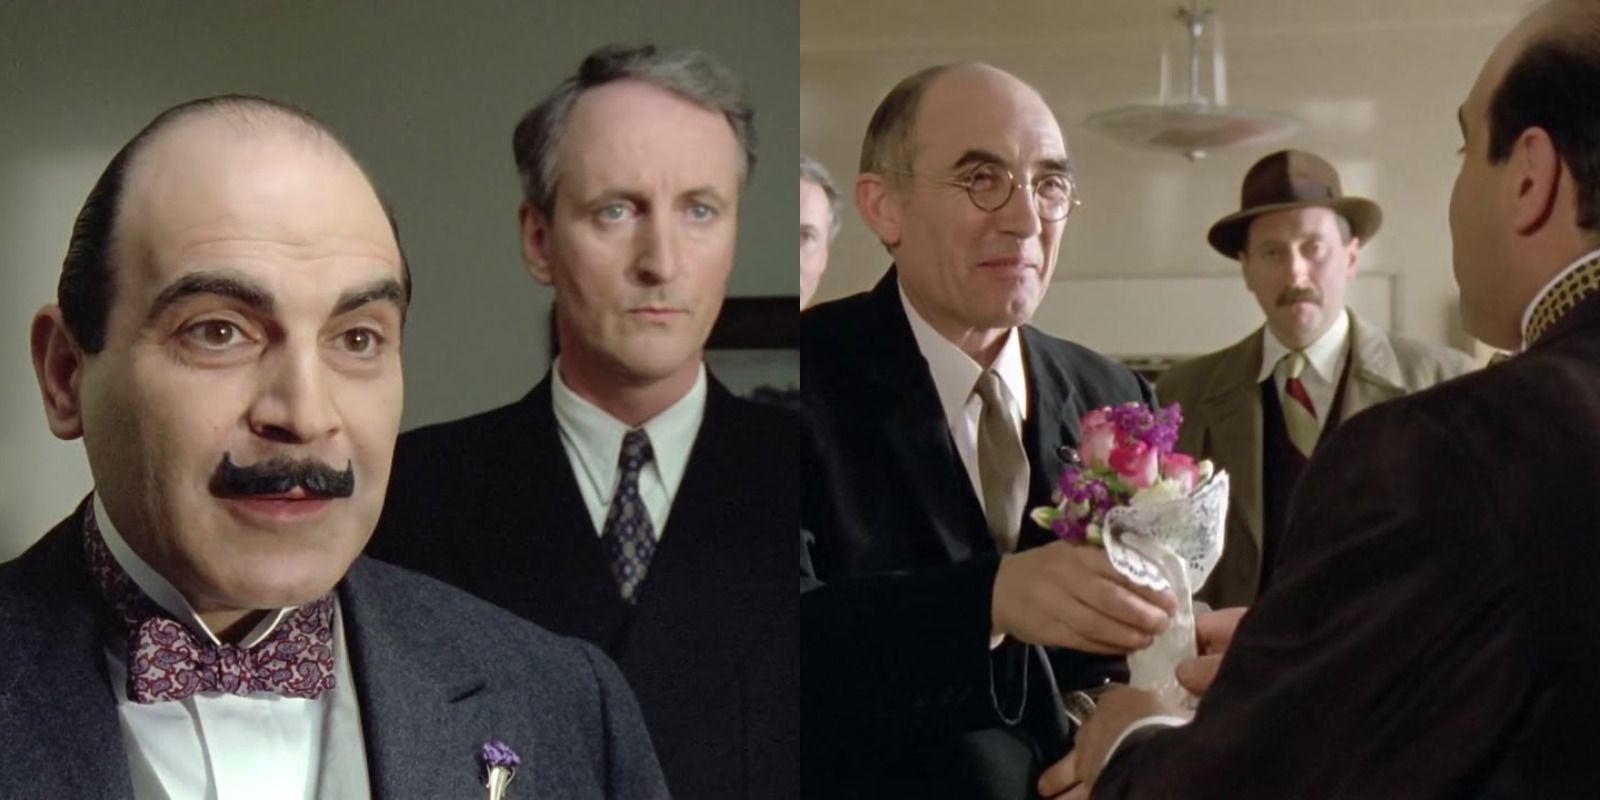 Split image of Poirot and Hastings looking forward and Cust giving flowers in Poirot